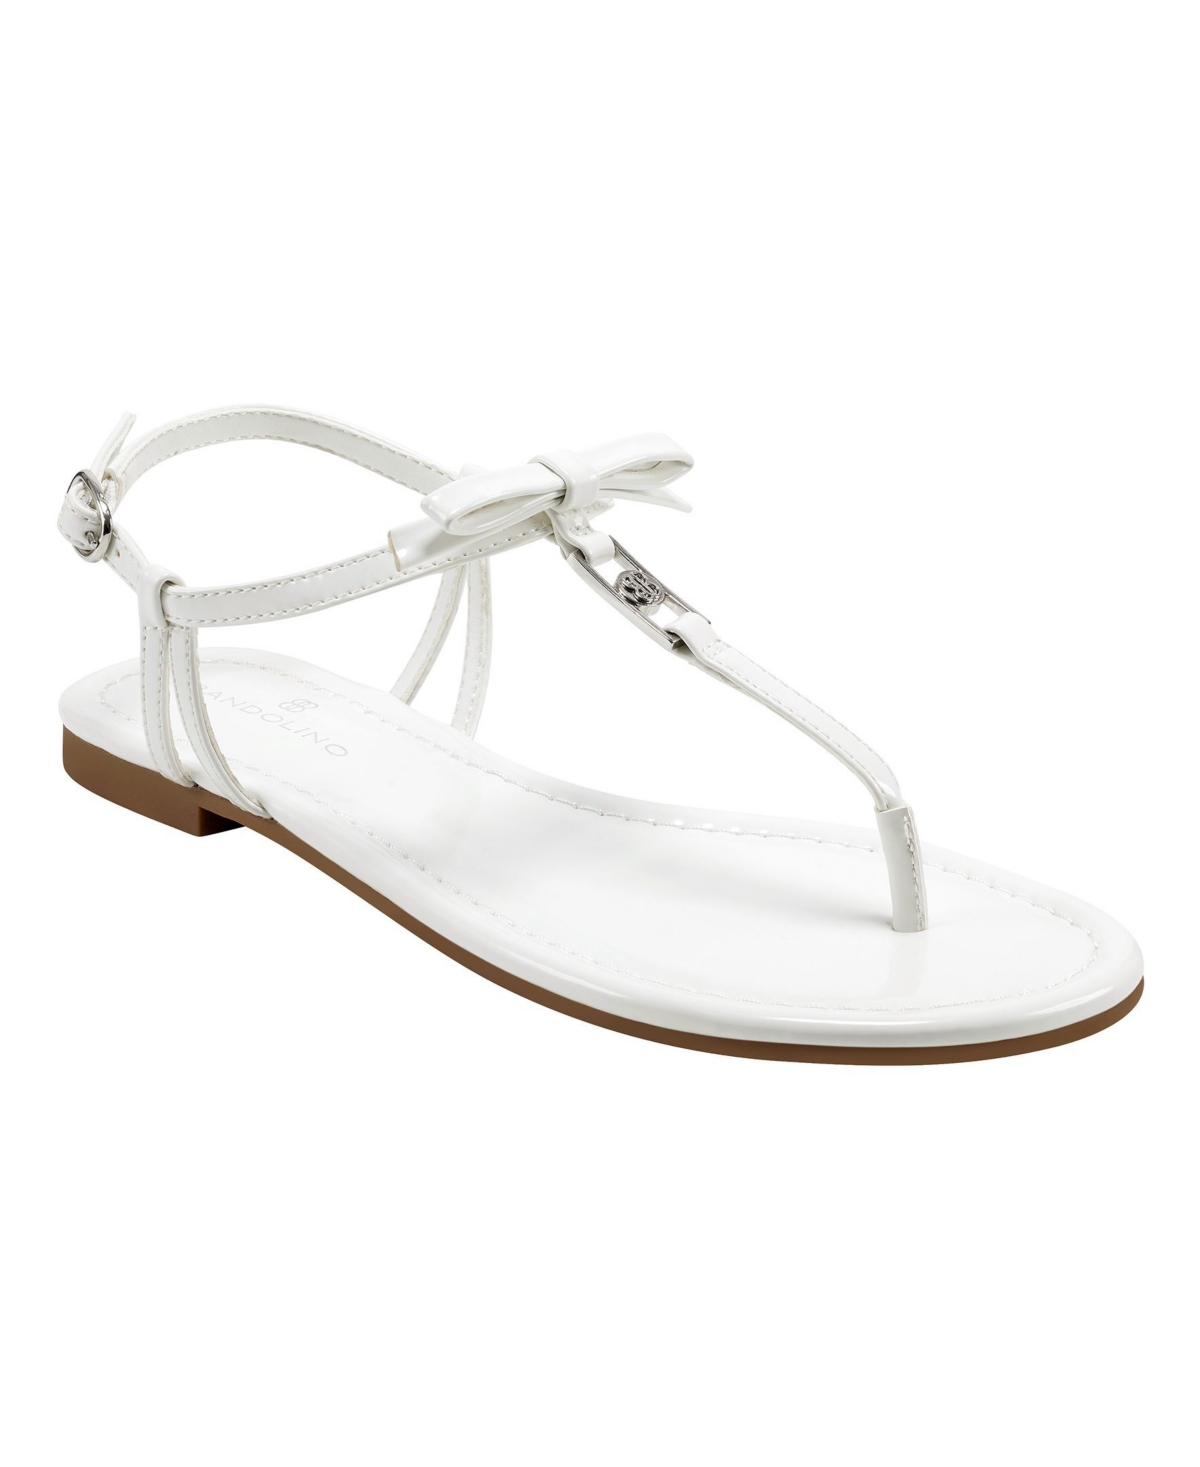 Bandolino Women's Kate Flat Sandals Women's Shoes In White Patent ...